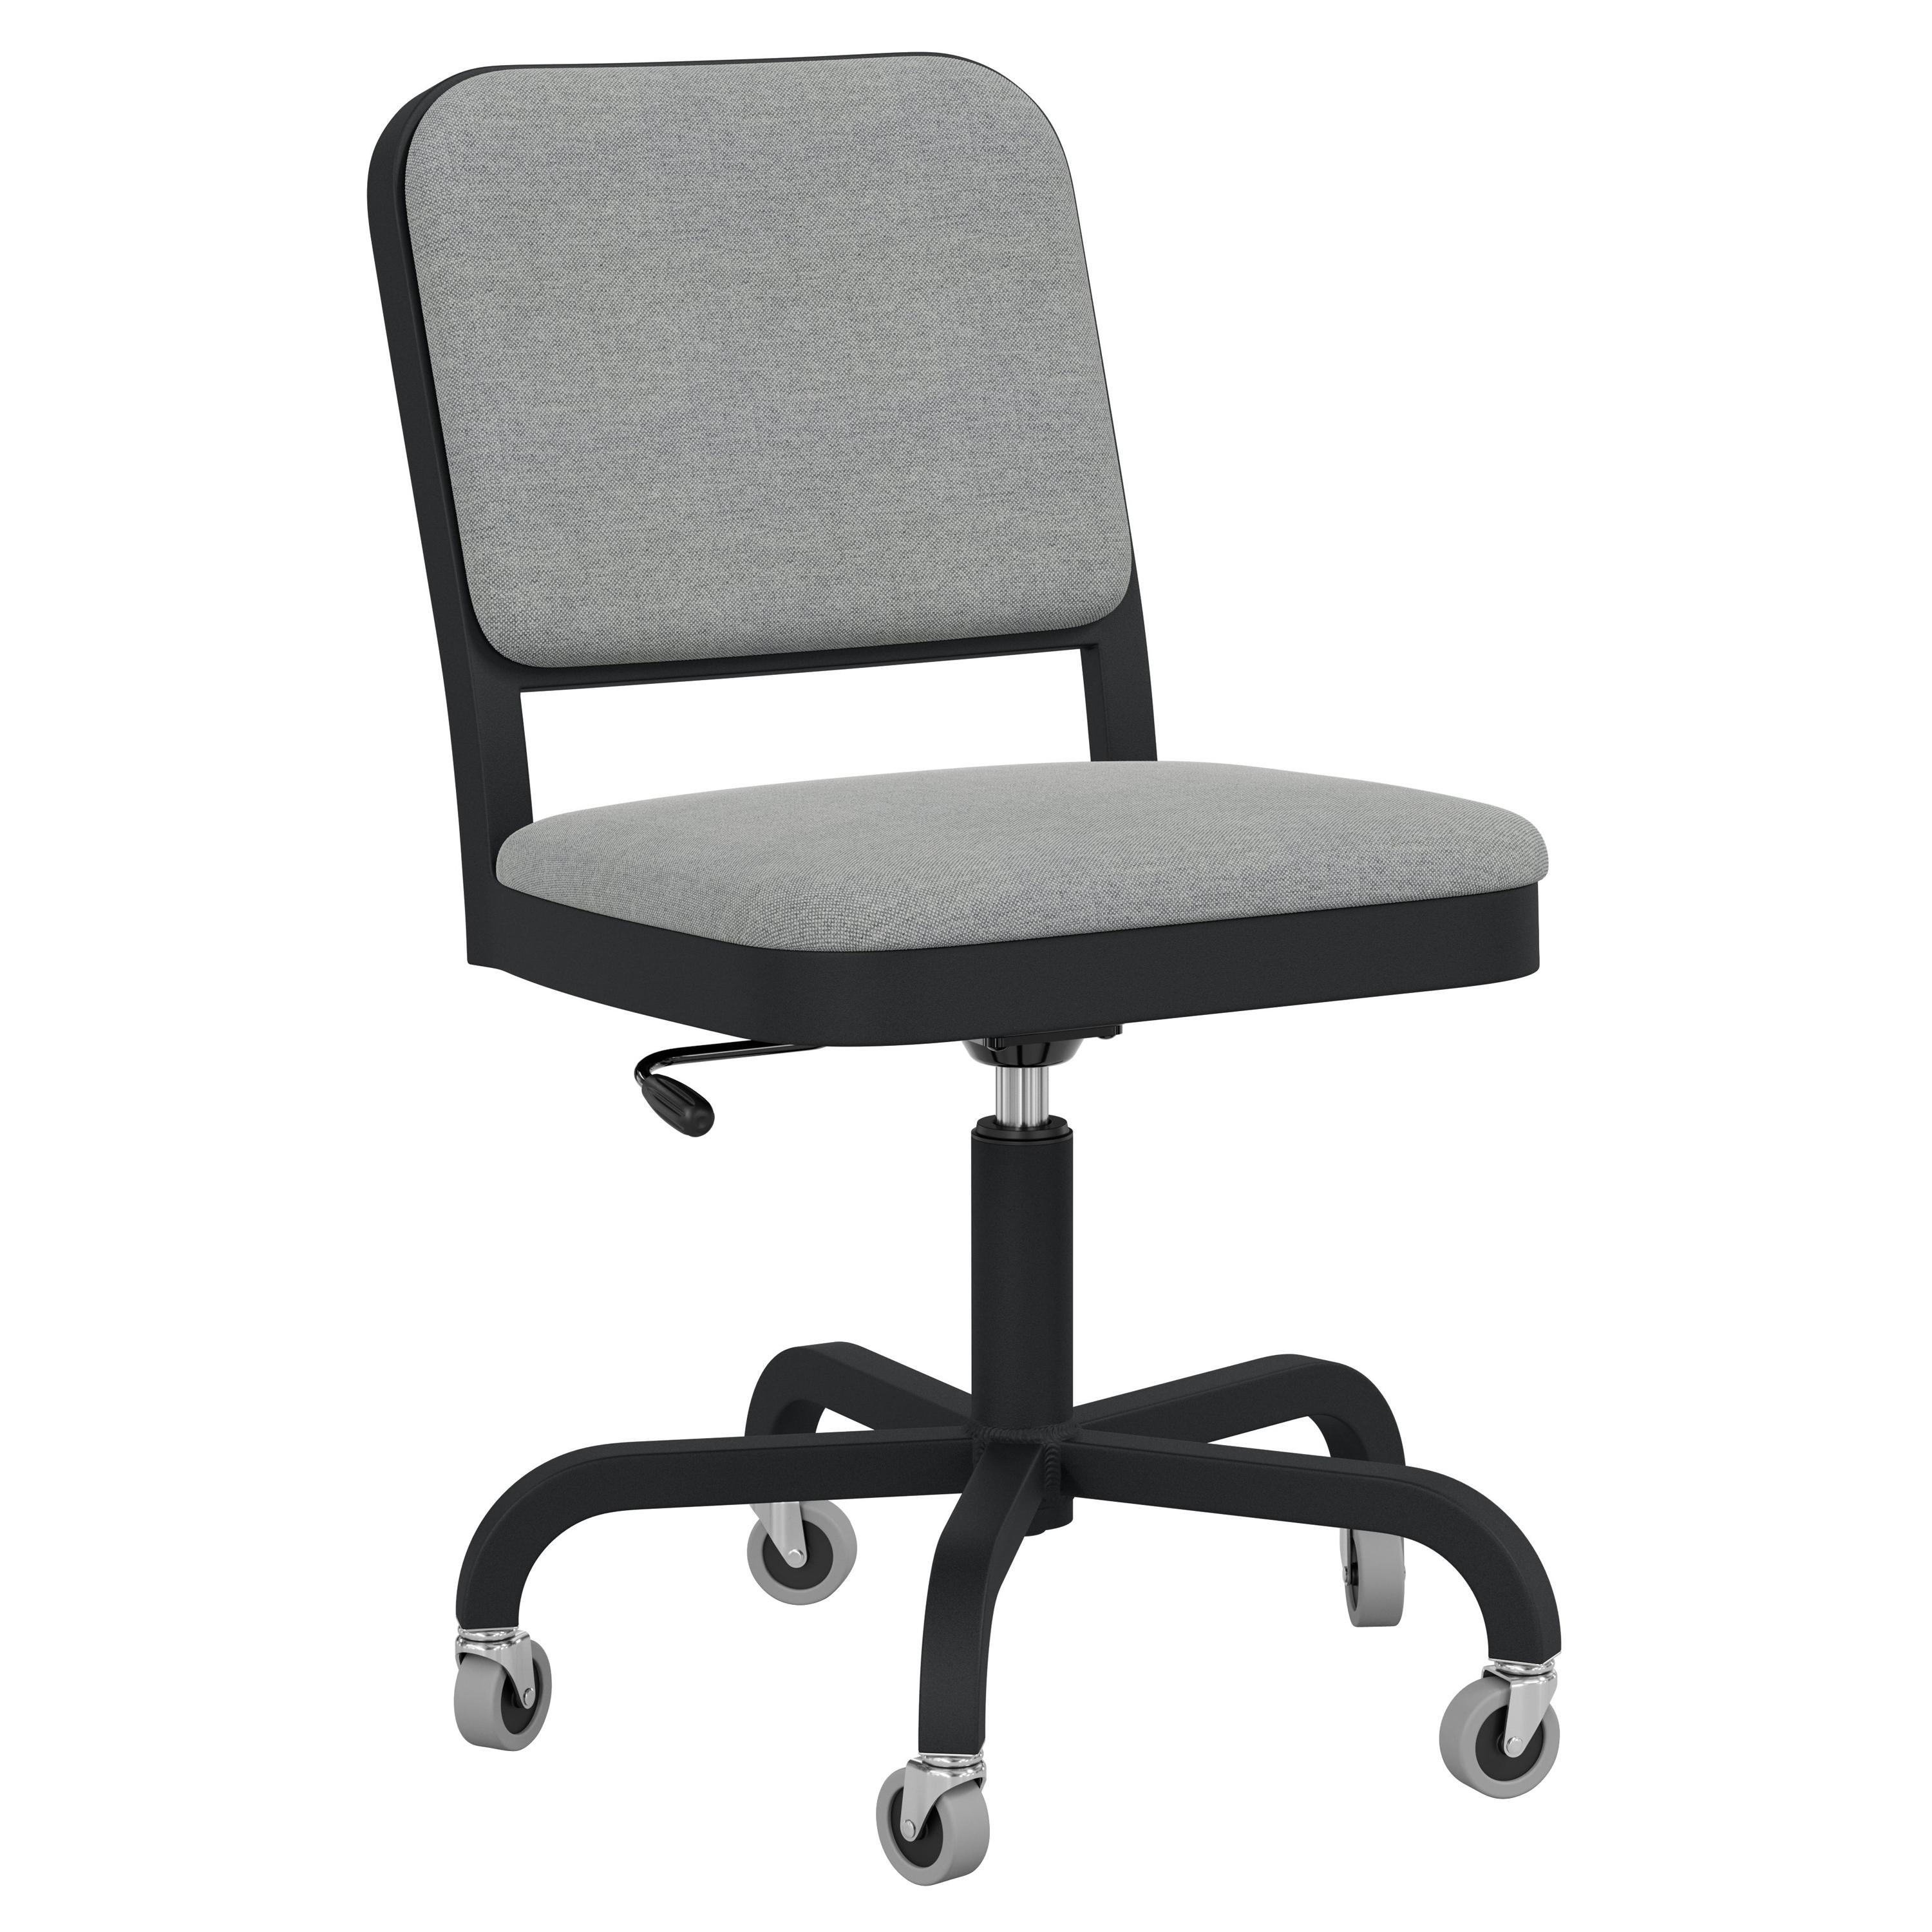 Emeco Navy Officer Swivel Chair in Grey Fabric with Black Powder Coated Frame For Sale